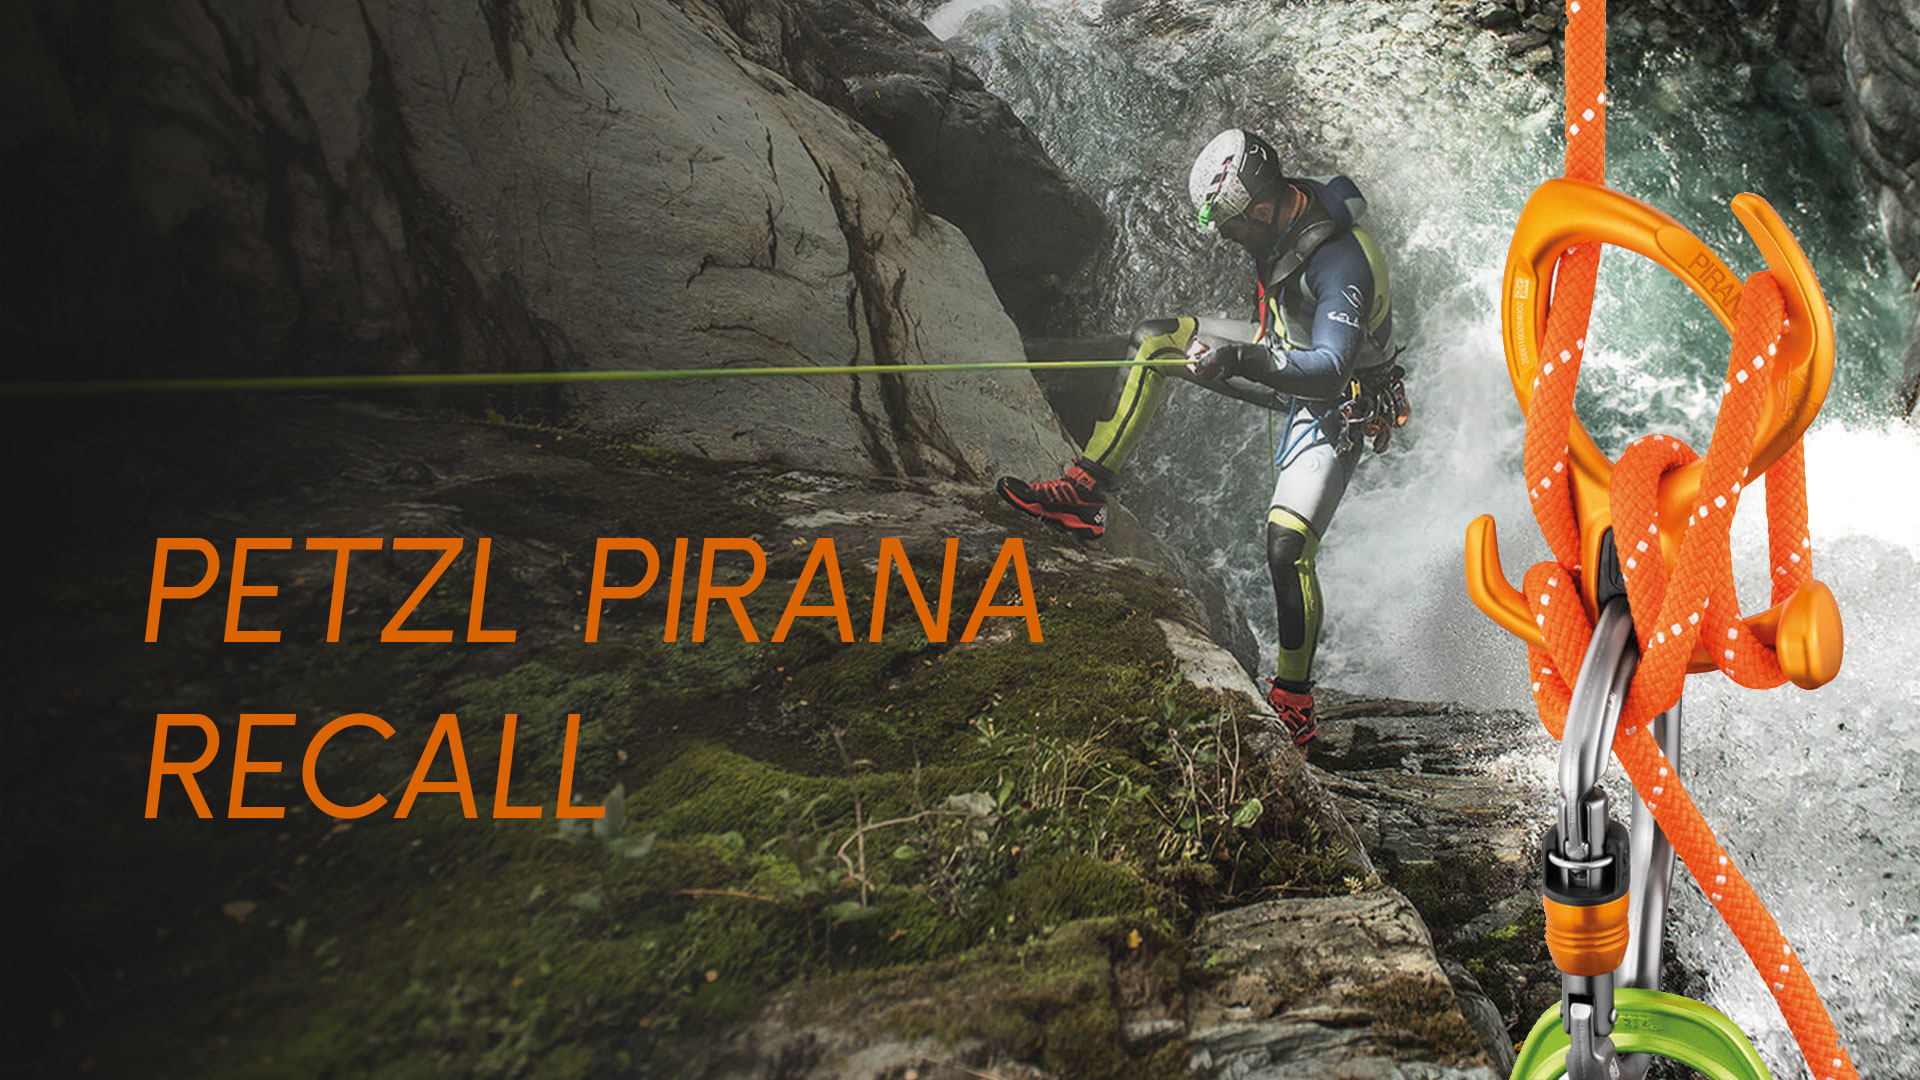 A canyoneer descending a waterfall and an image of the petzl pirana descender with the words Petzl Pirana Recall